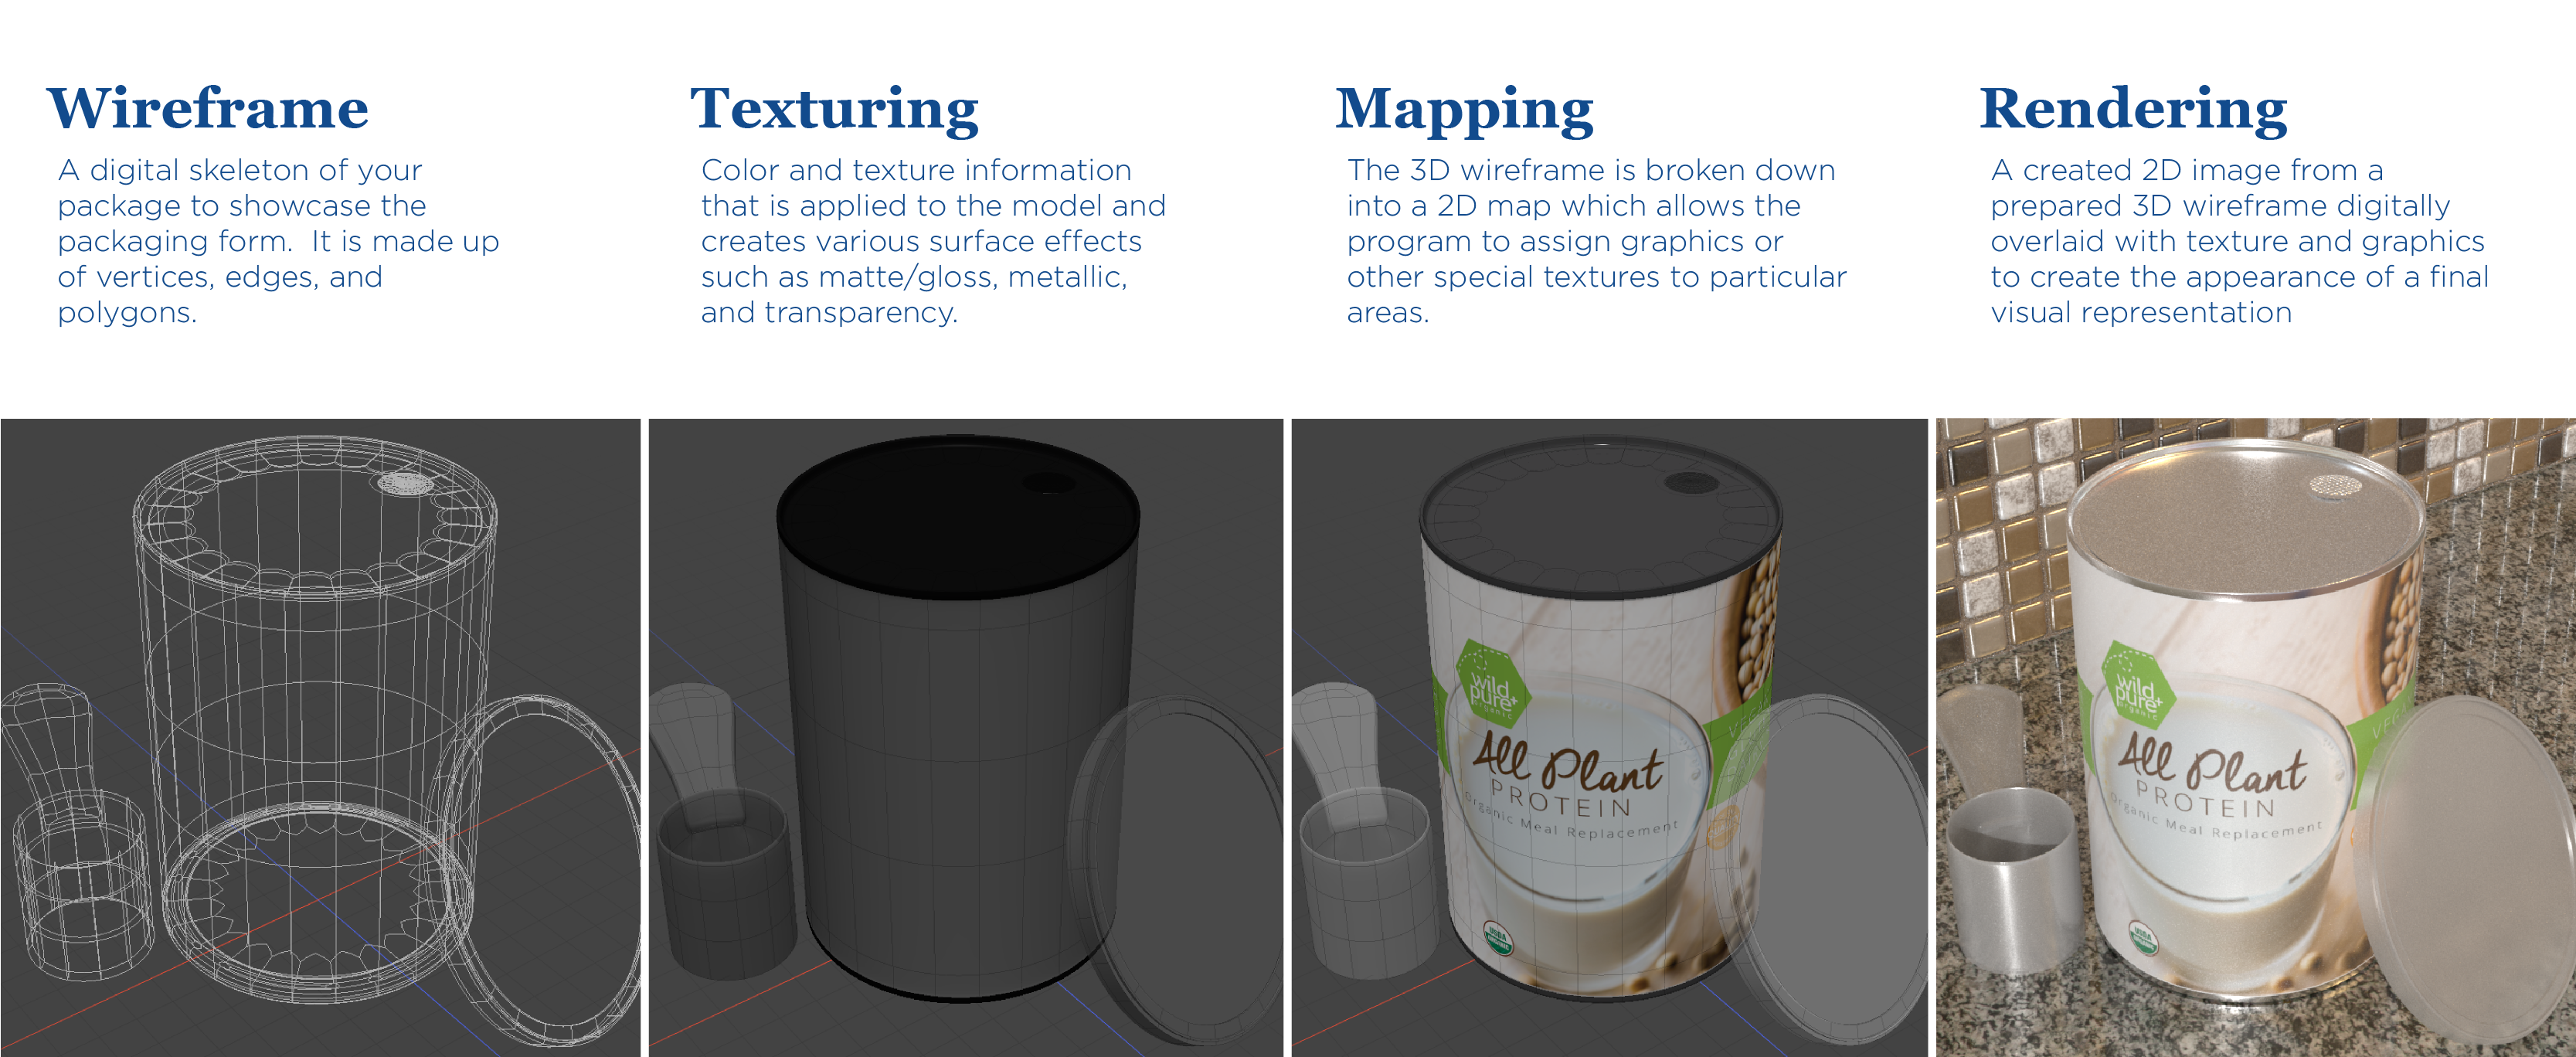 3D MODELING DEFINITIONS 